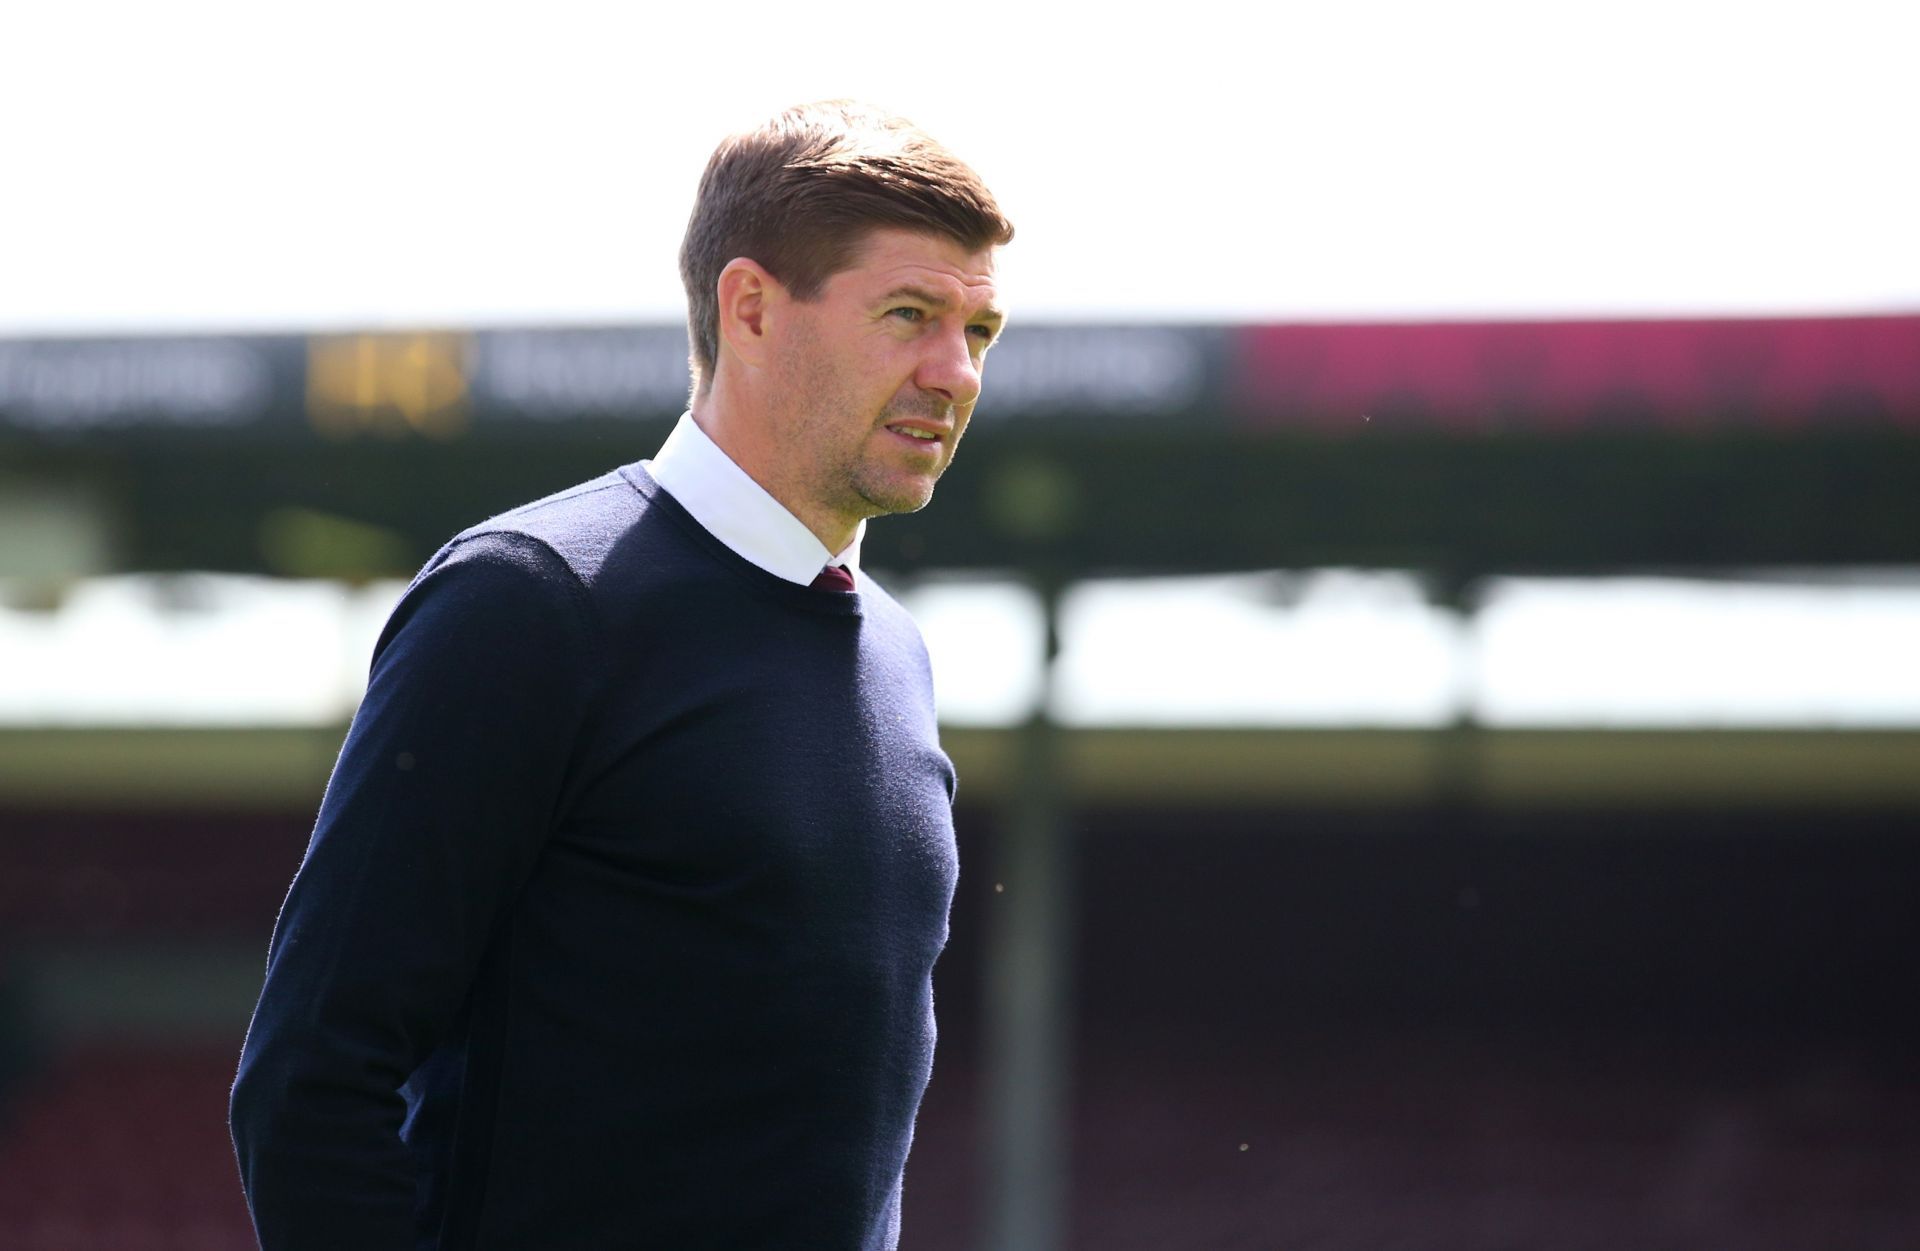 Steven Gerrard showed interest in signing a number of Liverpool players